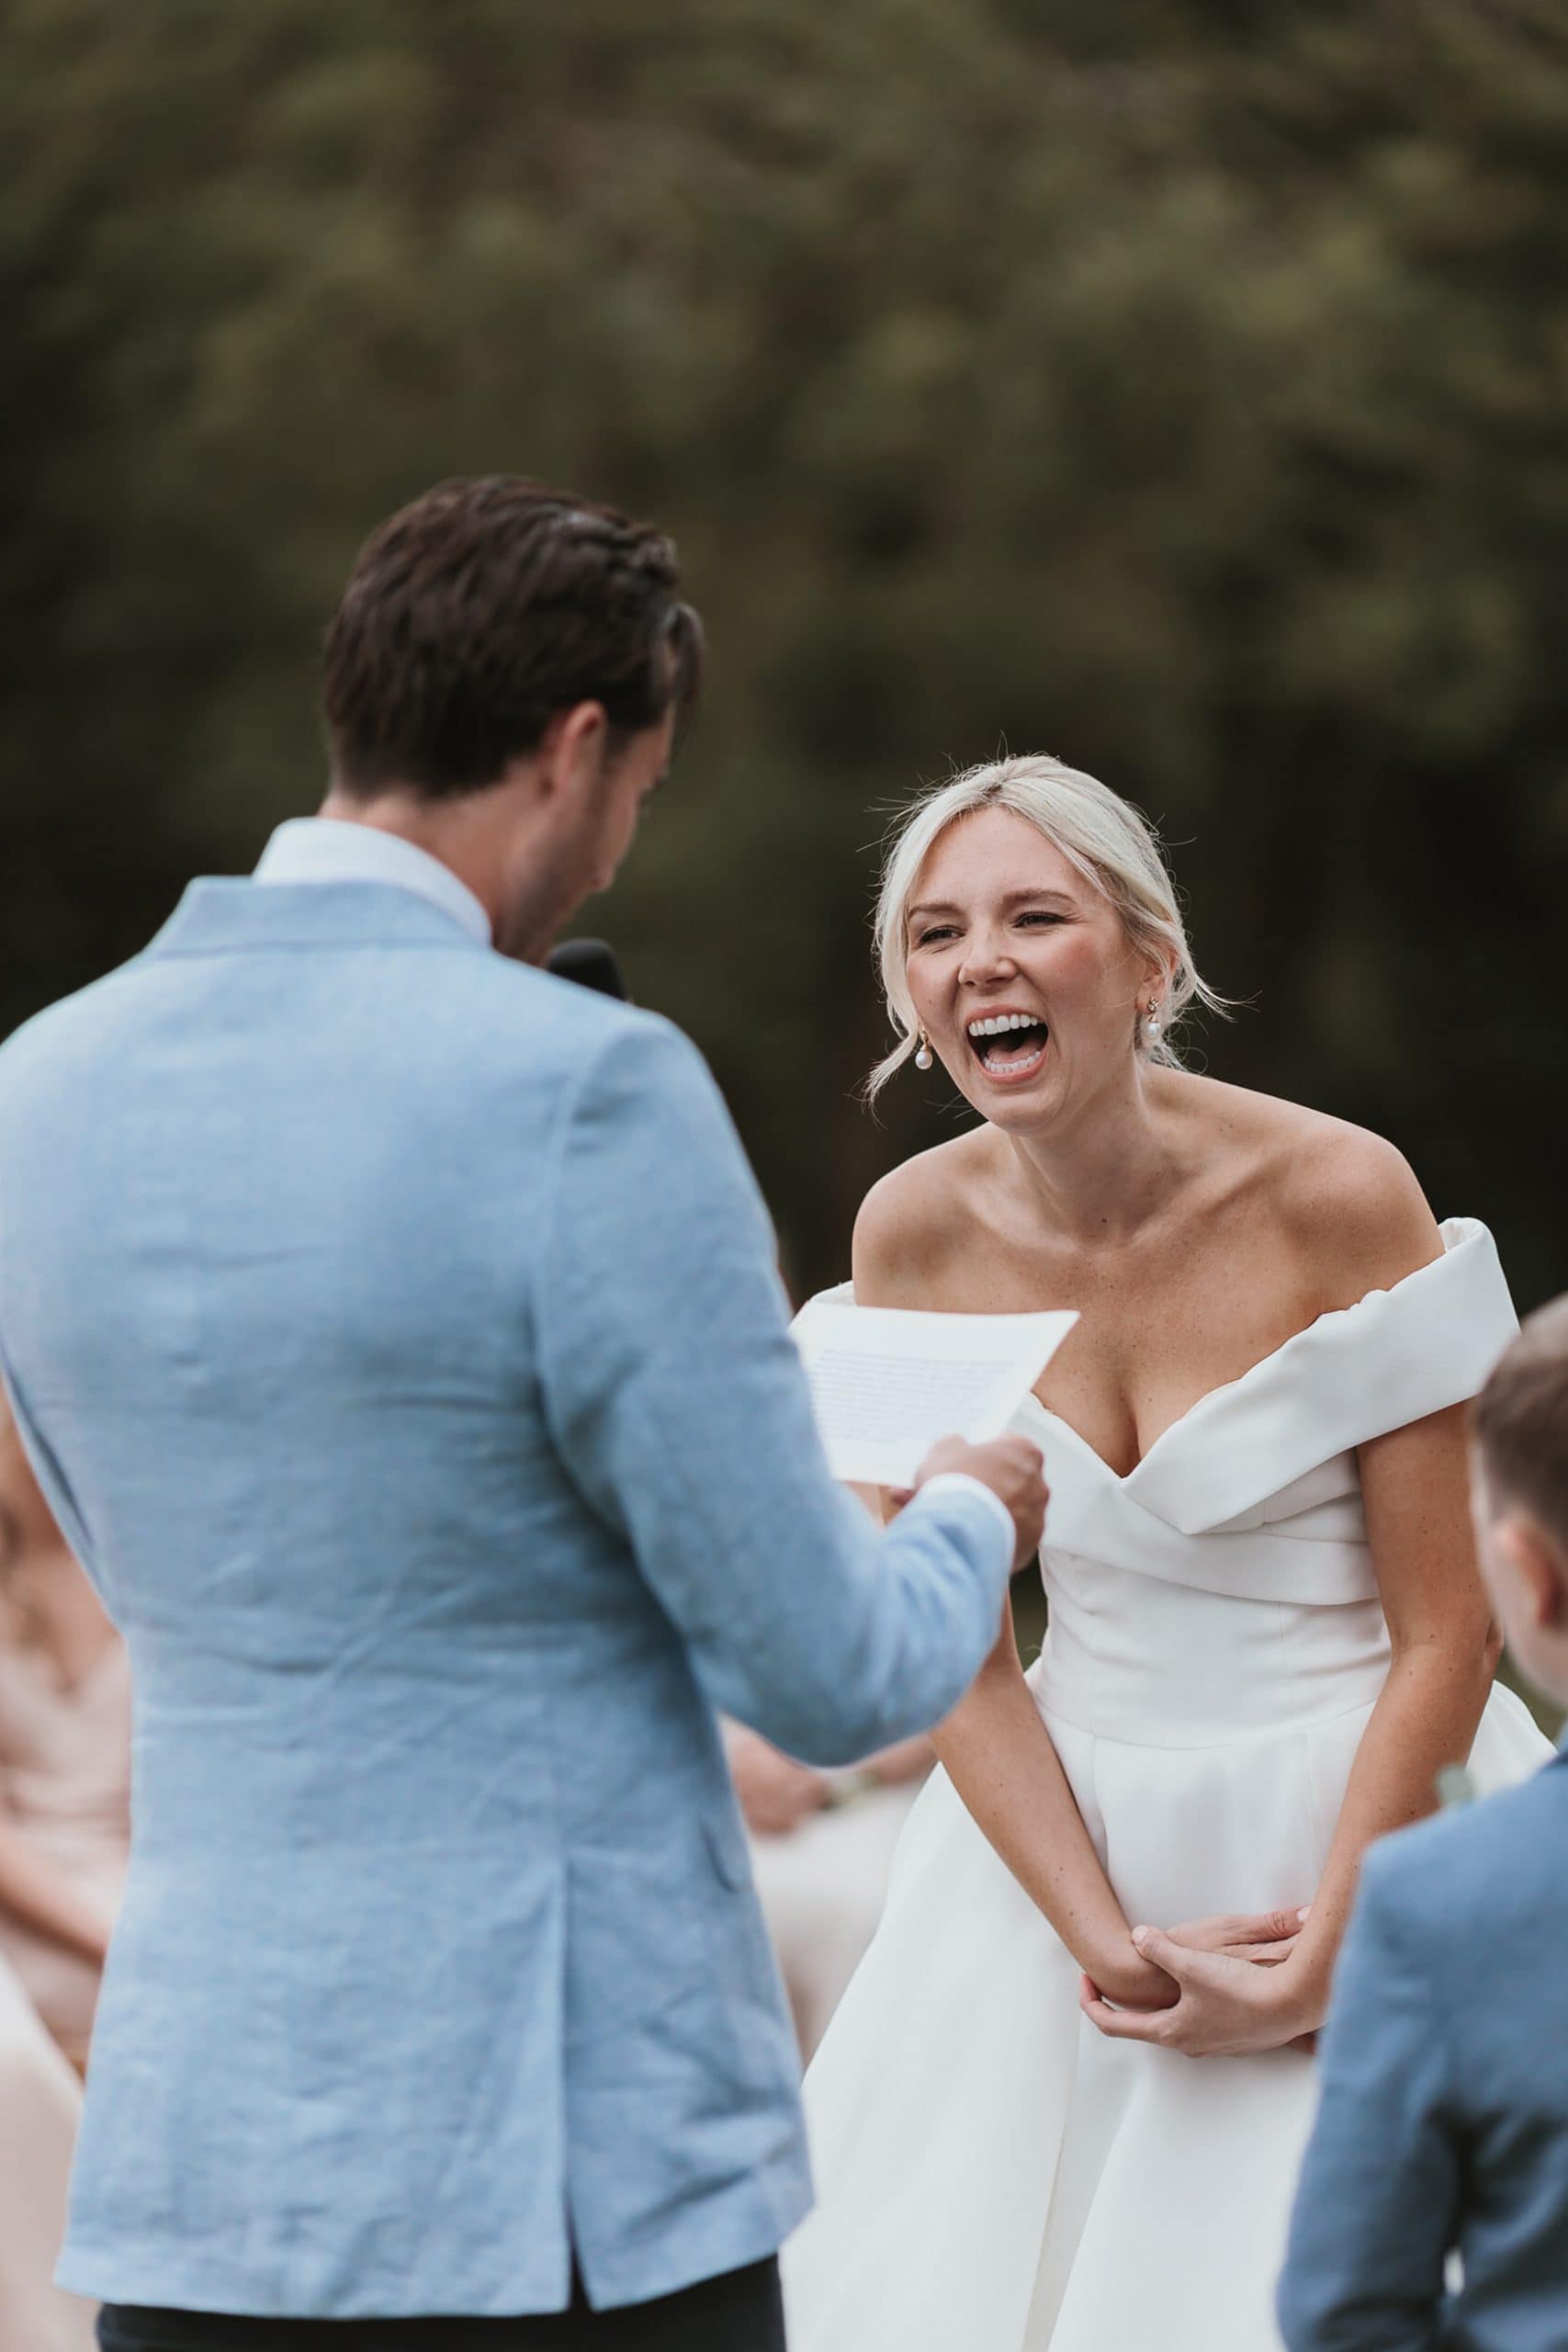 Bride with a massive smile on her face during her husbands ceremony speech